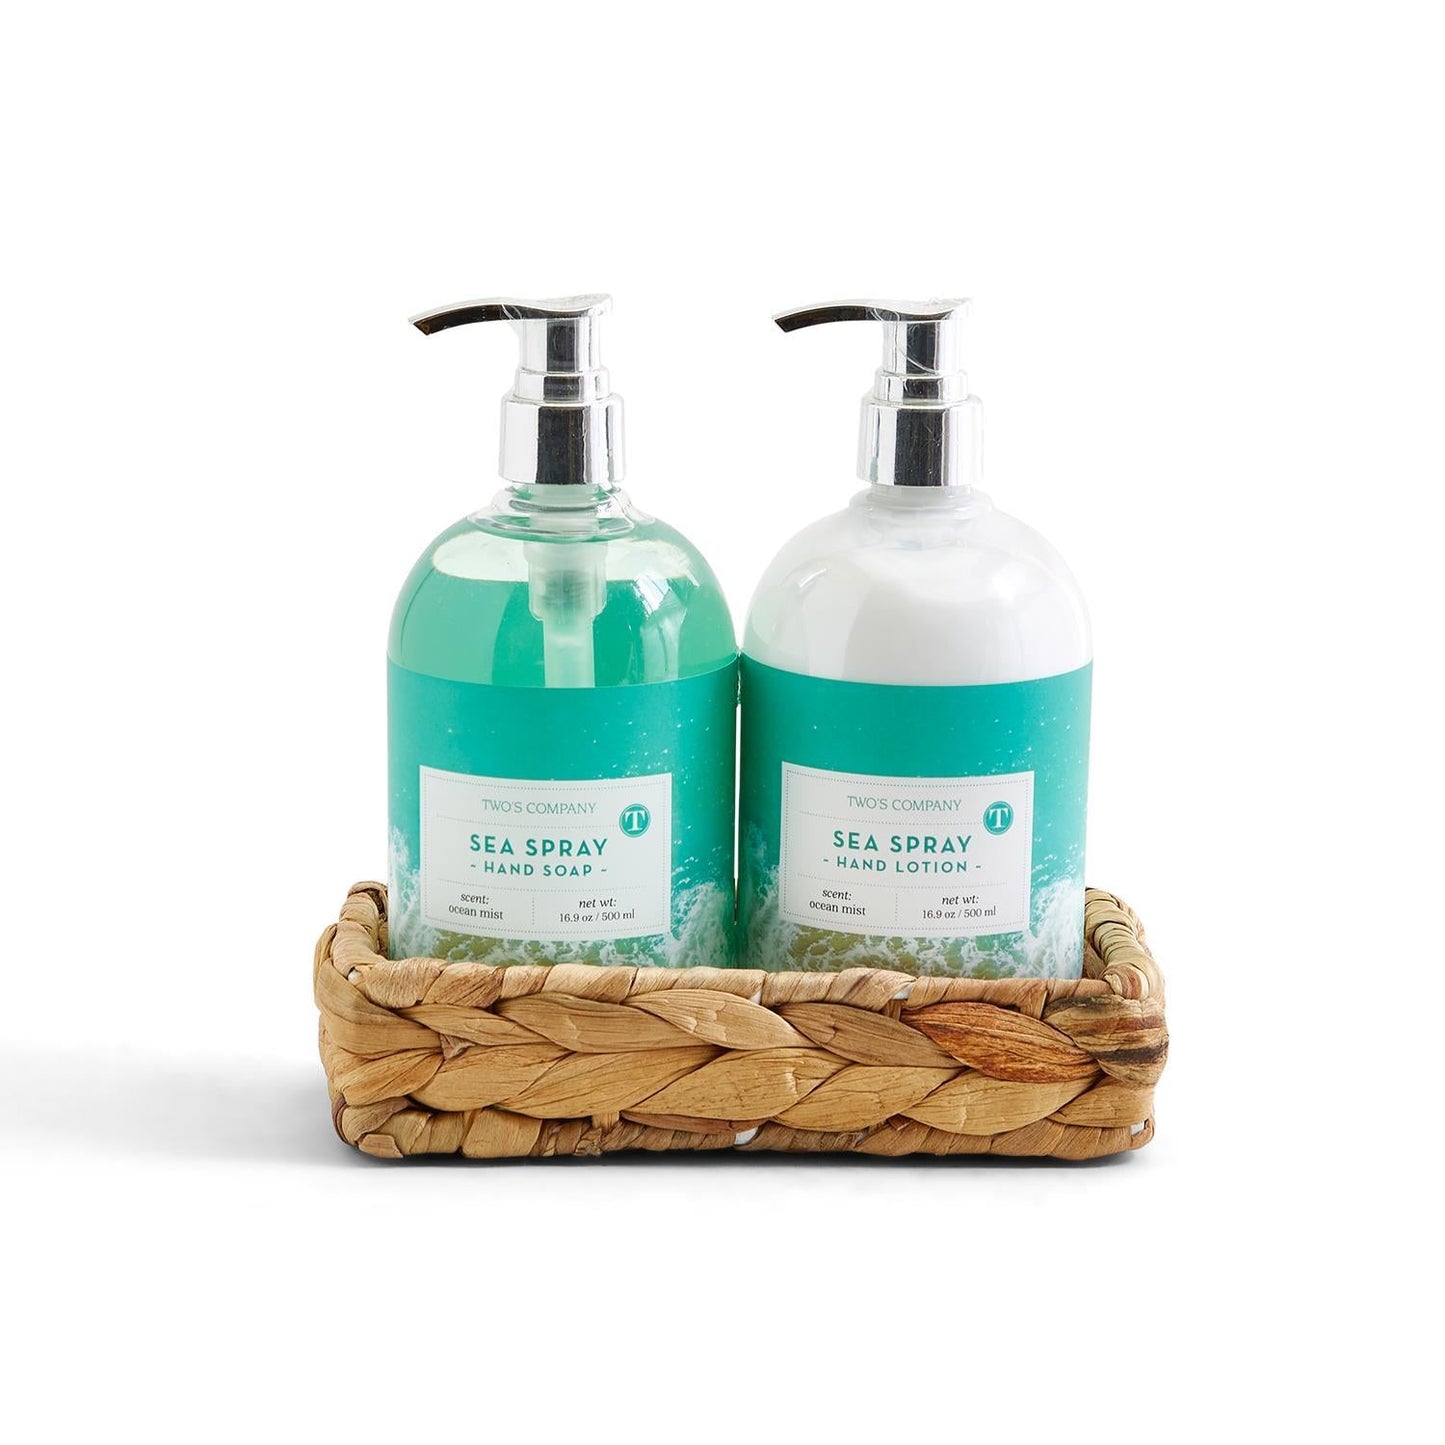 Sea Spray Ocean Scented Hand Soap and Lotion Set in Hand-Crafted Reed Tray - 16.9-oz each - Mellow Monkey